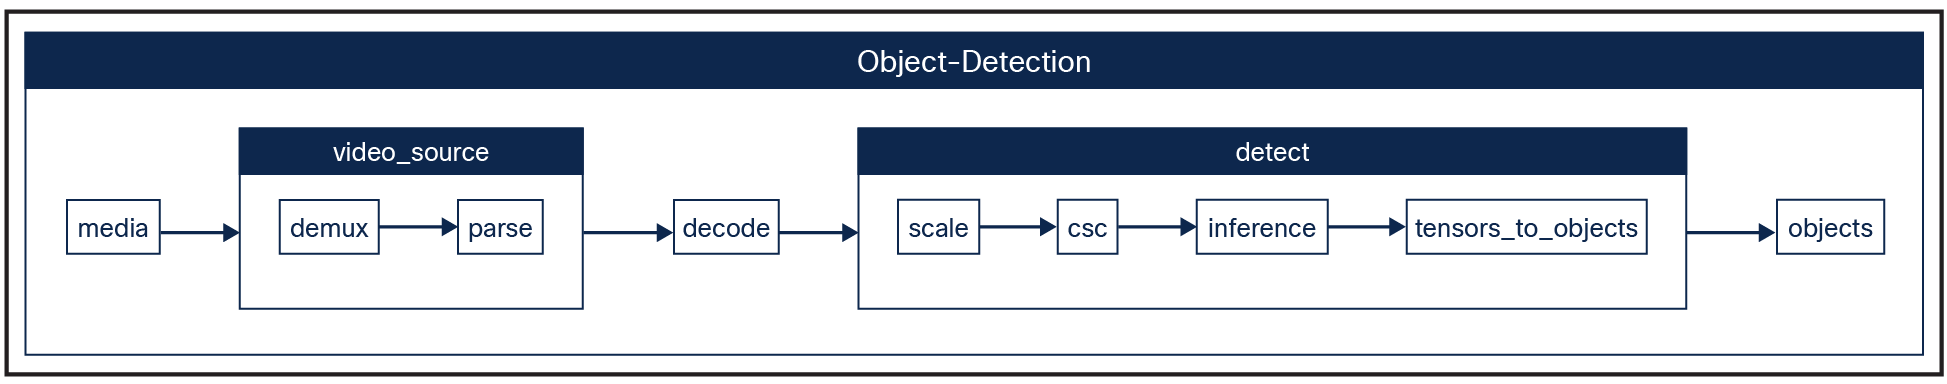 Example of media analytics pipeline for Object detection